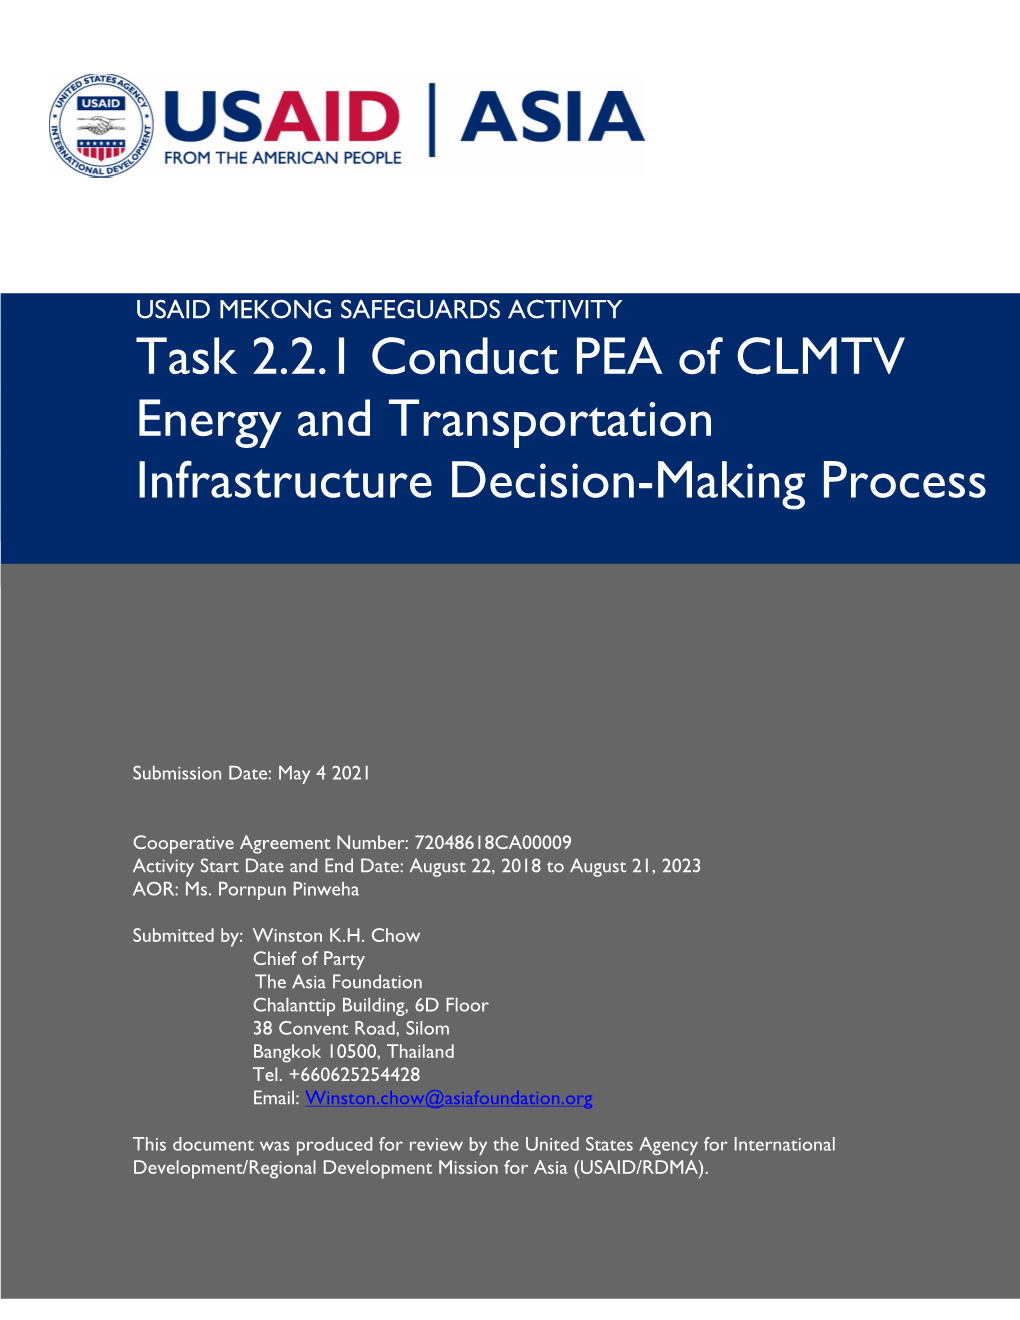 Task 2.2.1 Conduct PEA of CLMTV Energy and Transportation